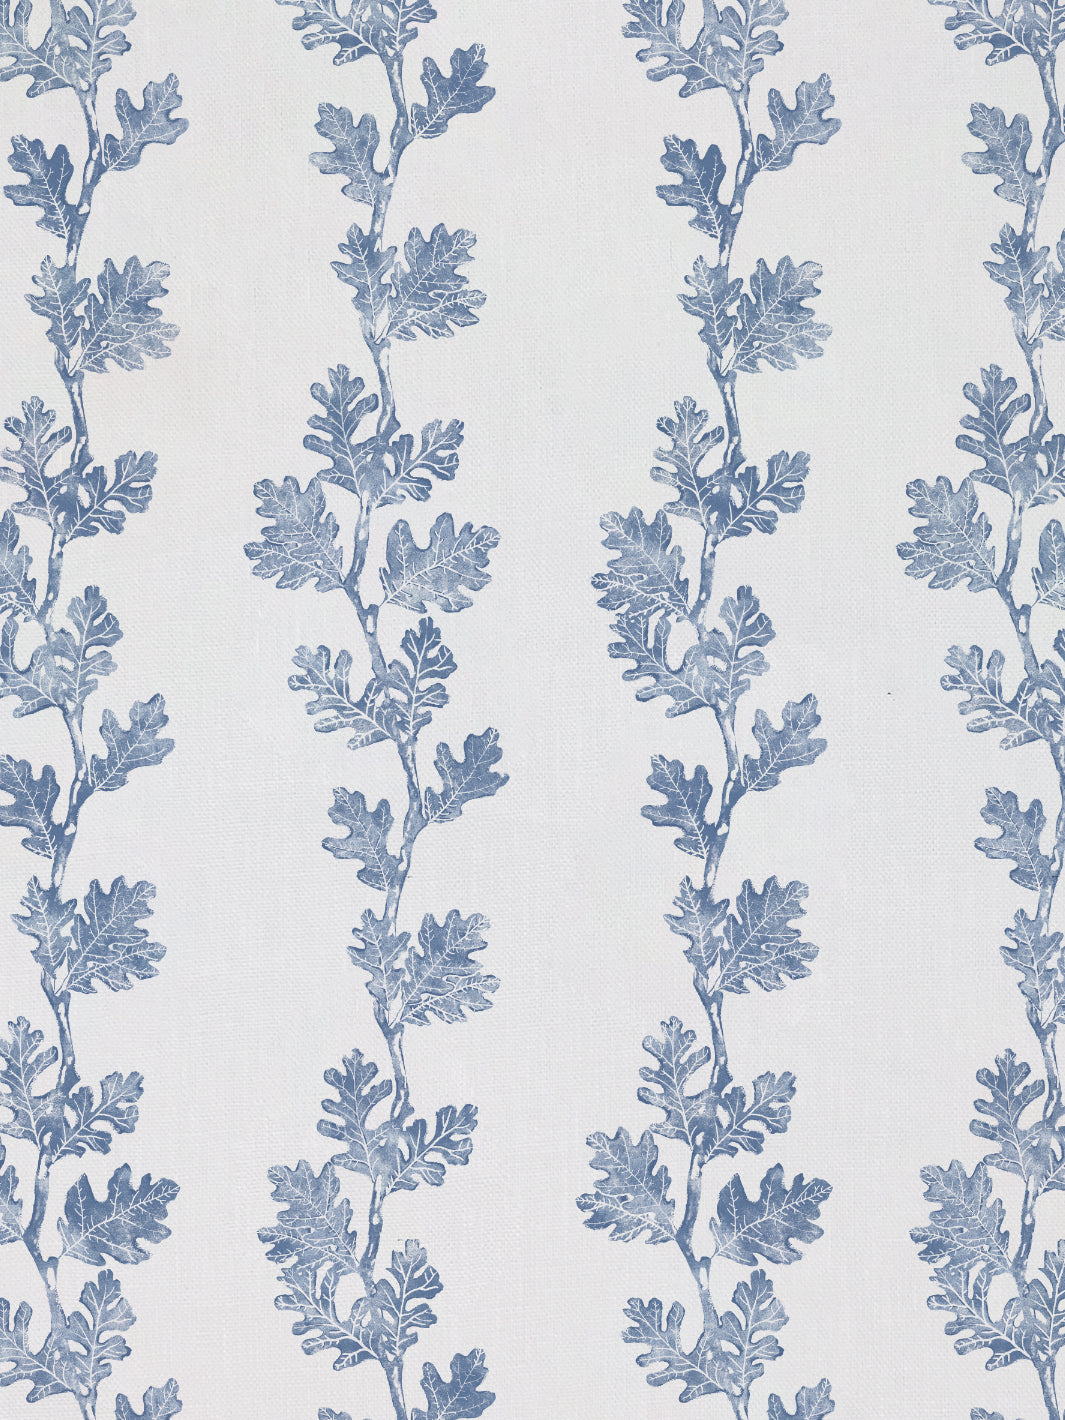 'Valley Oak Stripe' Linen Fabric by Nathan Turner - Blue